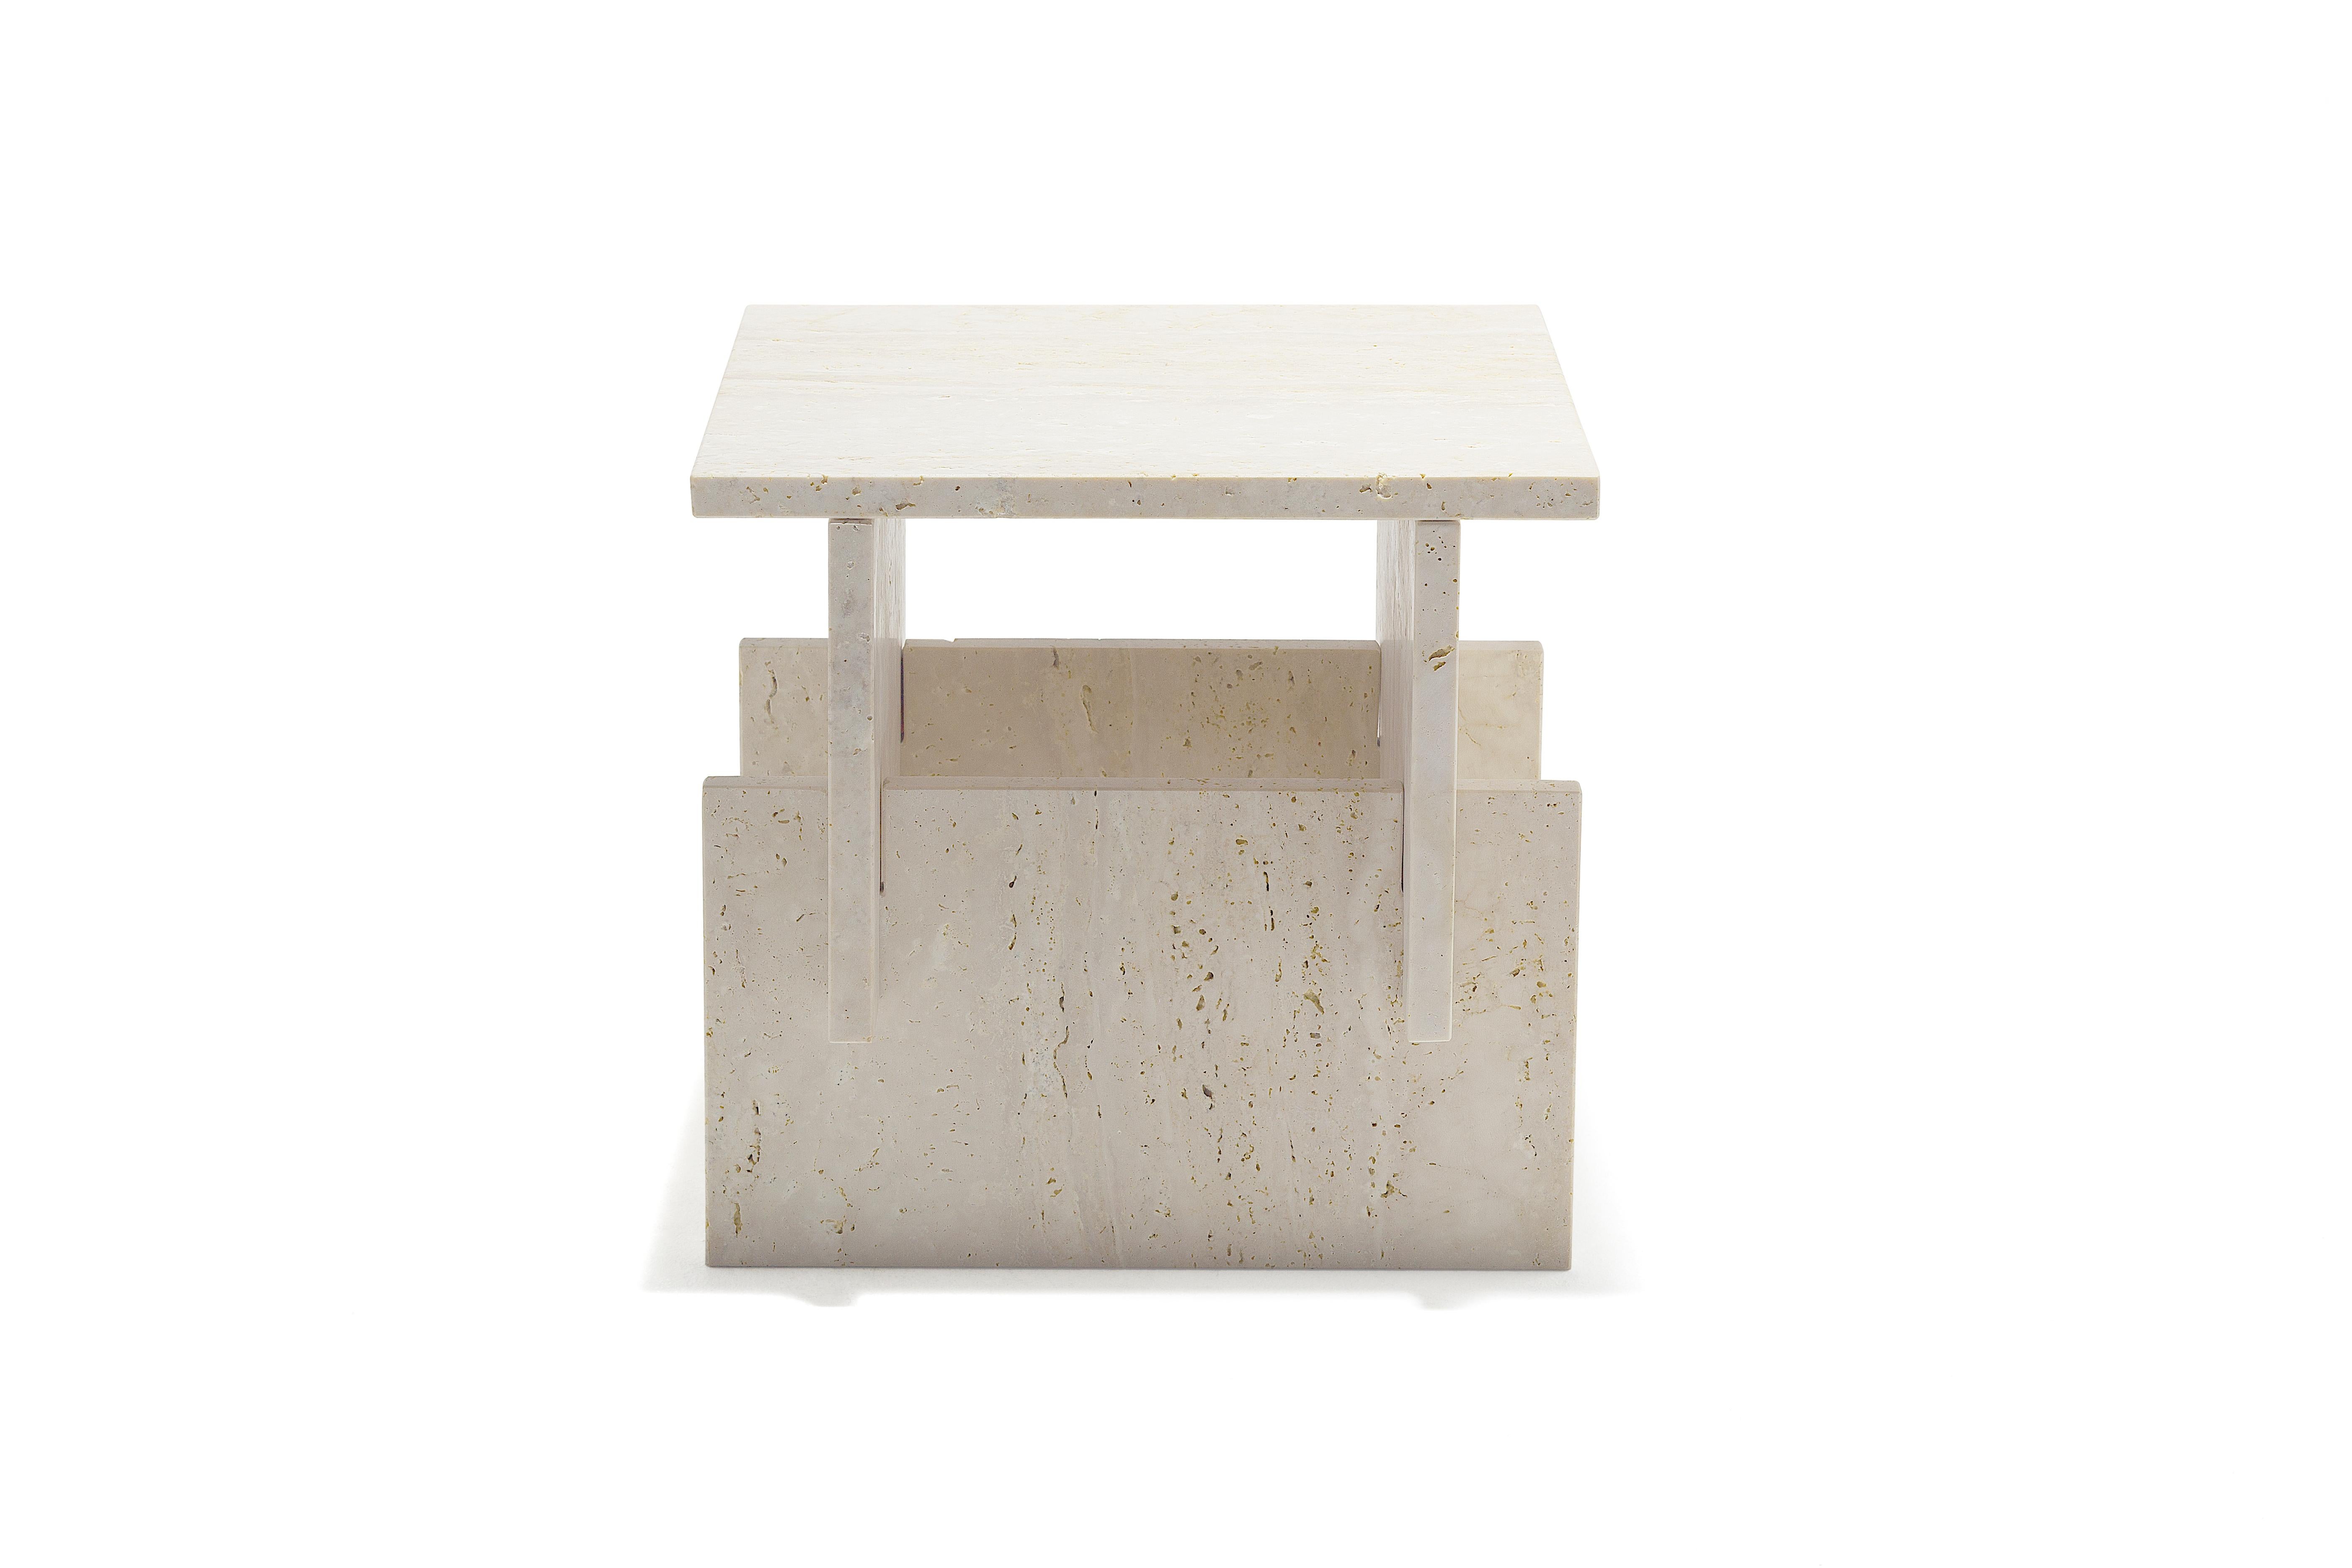 Marbelous fit side table in Minimalist style is a low table composed of stone piece overhanging two legs both in the same material, and forming a harmonical and logical assembly. Josep Vila Capdevila seeks the essence of objects through the shape